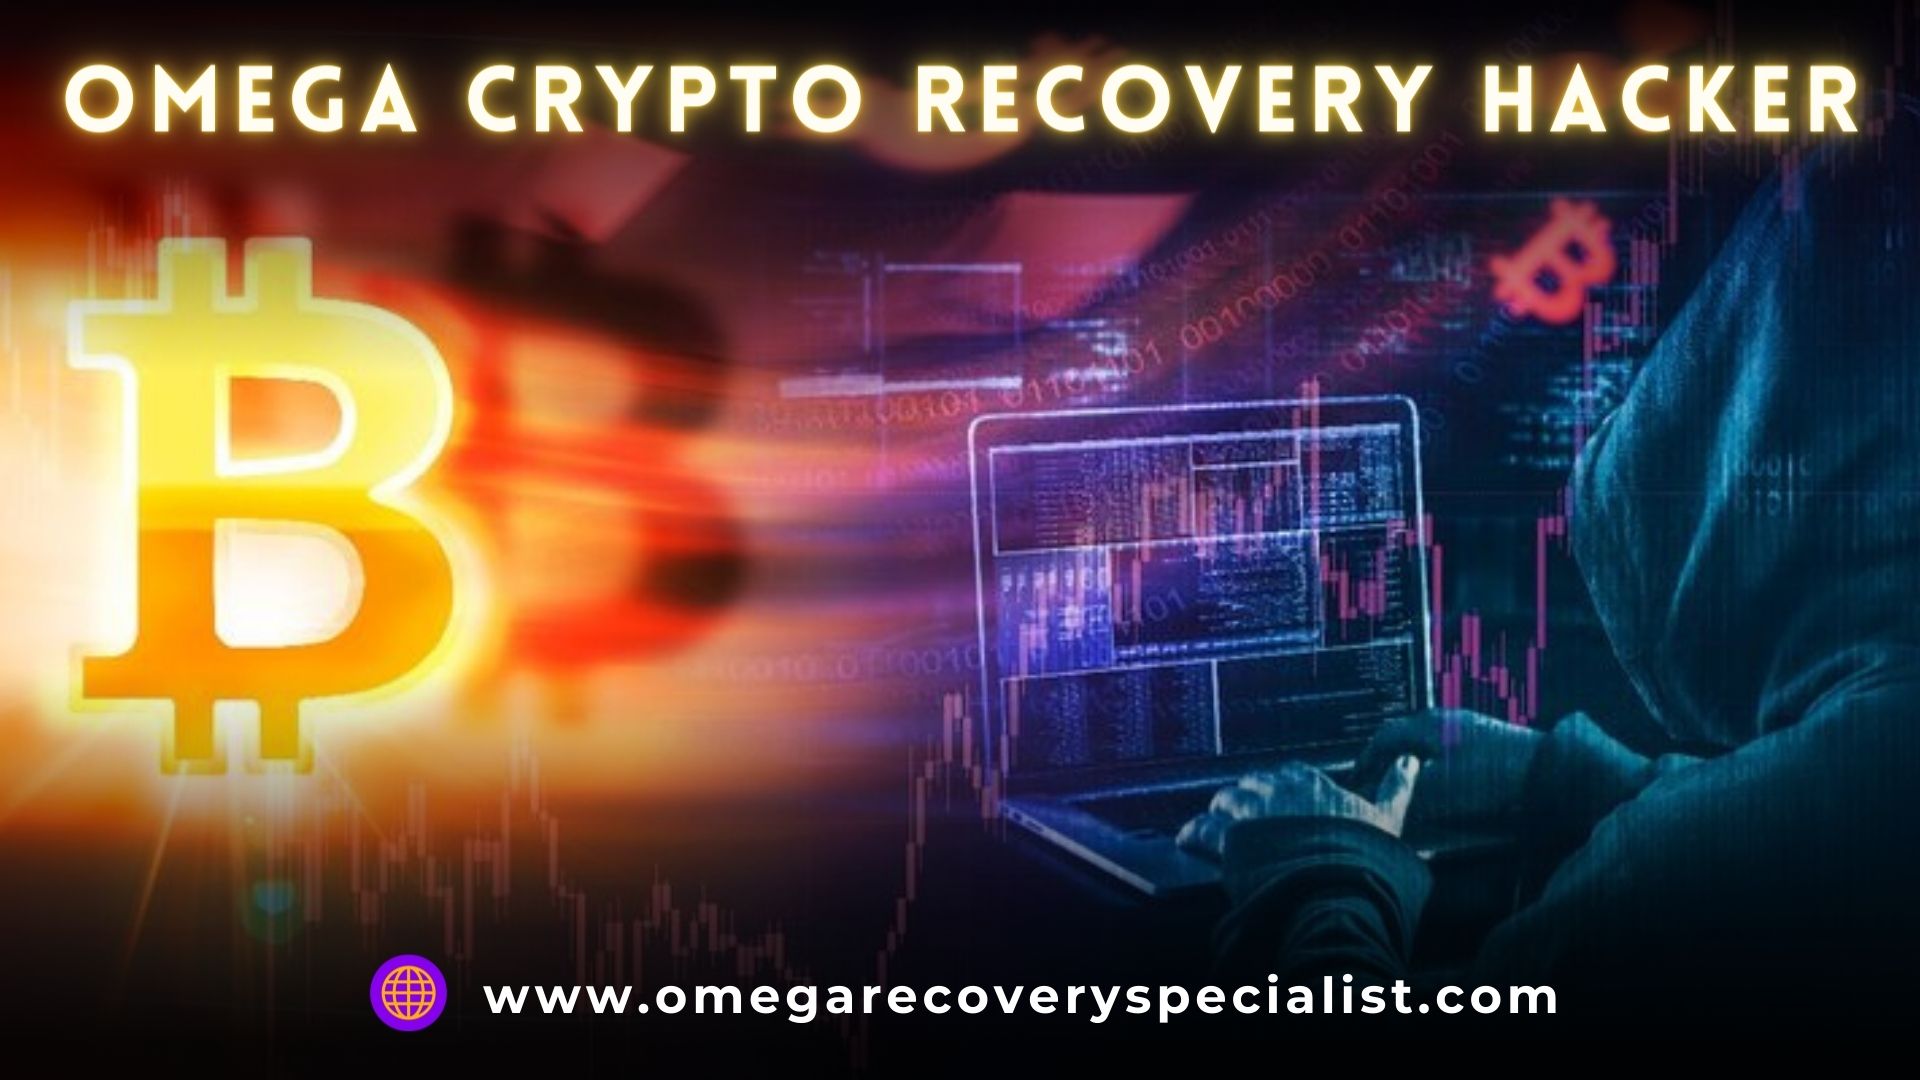 How to Recover Lost / Stolen BTC, Tether USDT - Go to OMEGA CRYPTO RECOVERY SPECIALIST HACKER, Online Event